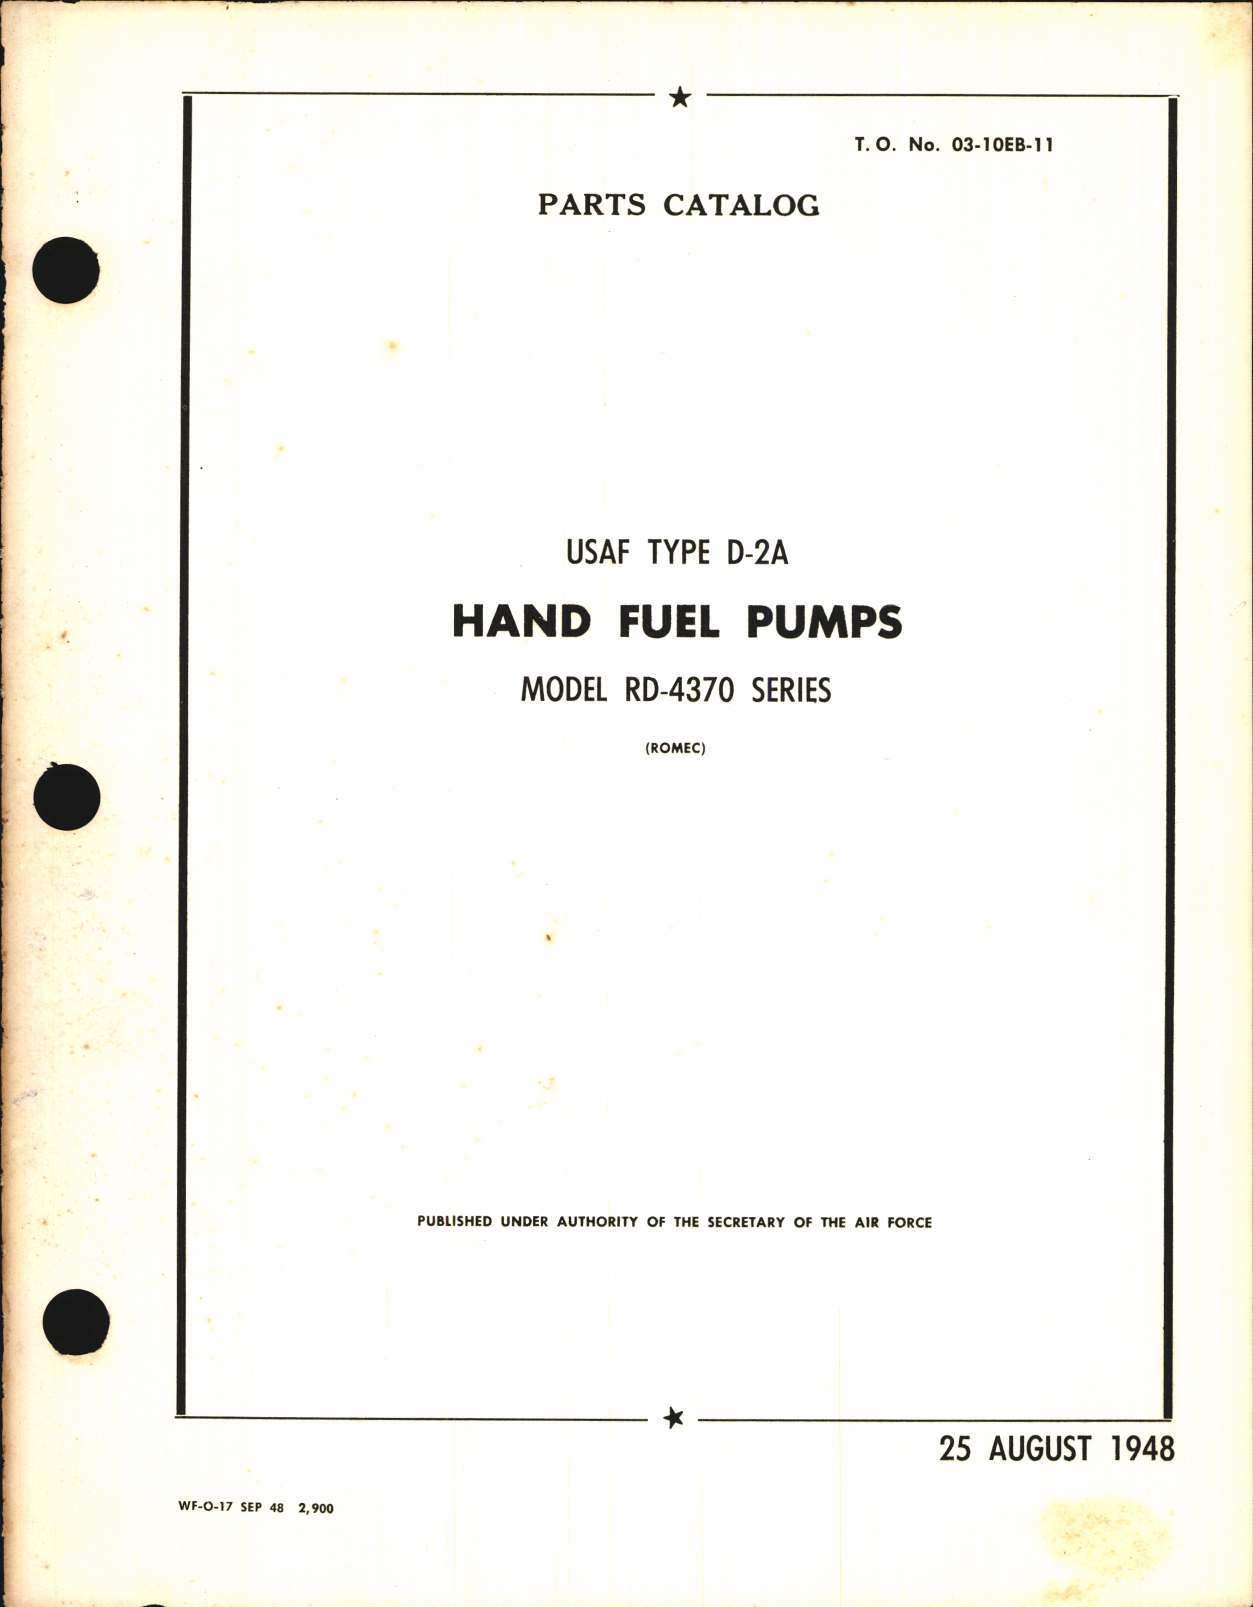 Sample page 1 from AirCorps Library document: Parts Catalog for USAF Type D-2A Hand Fuel Pumps Model RD-4370 Series